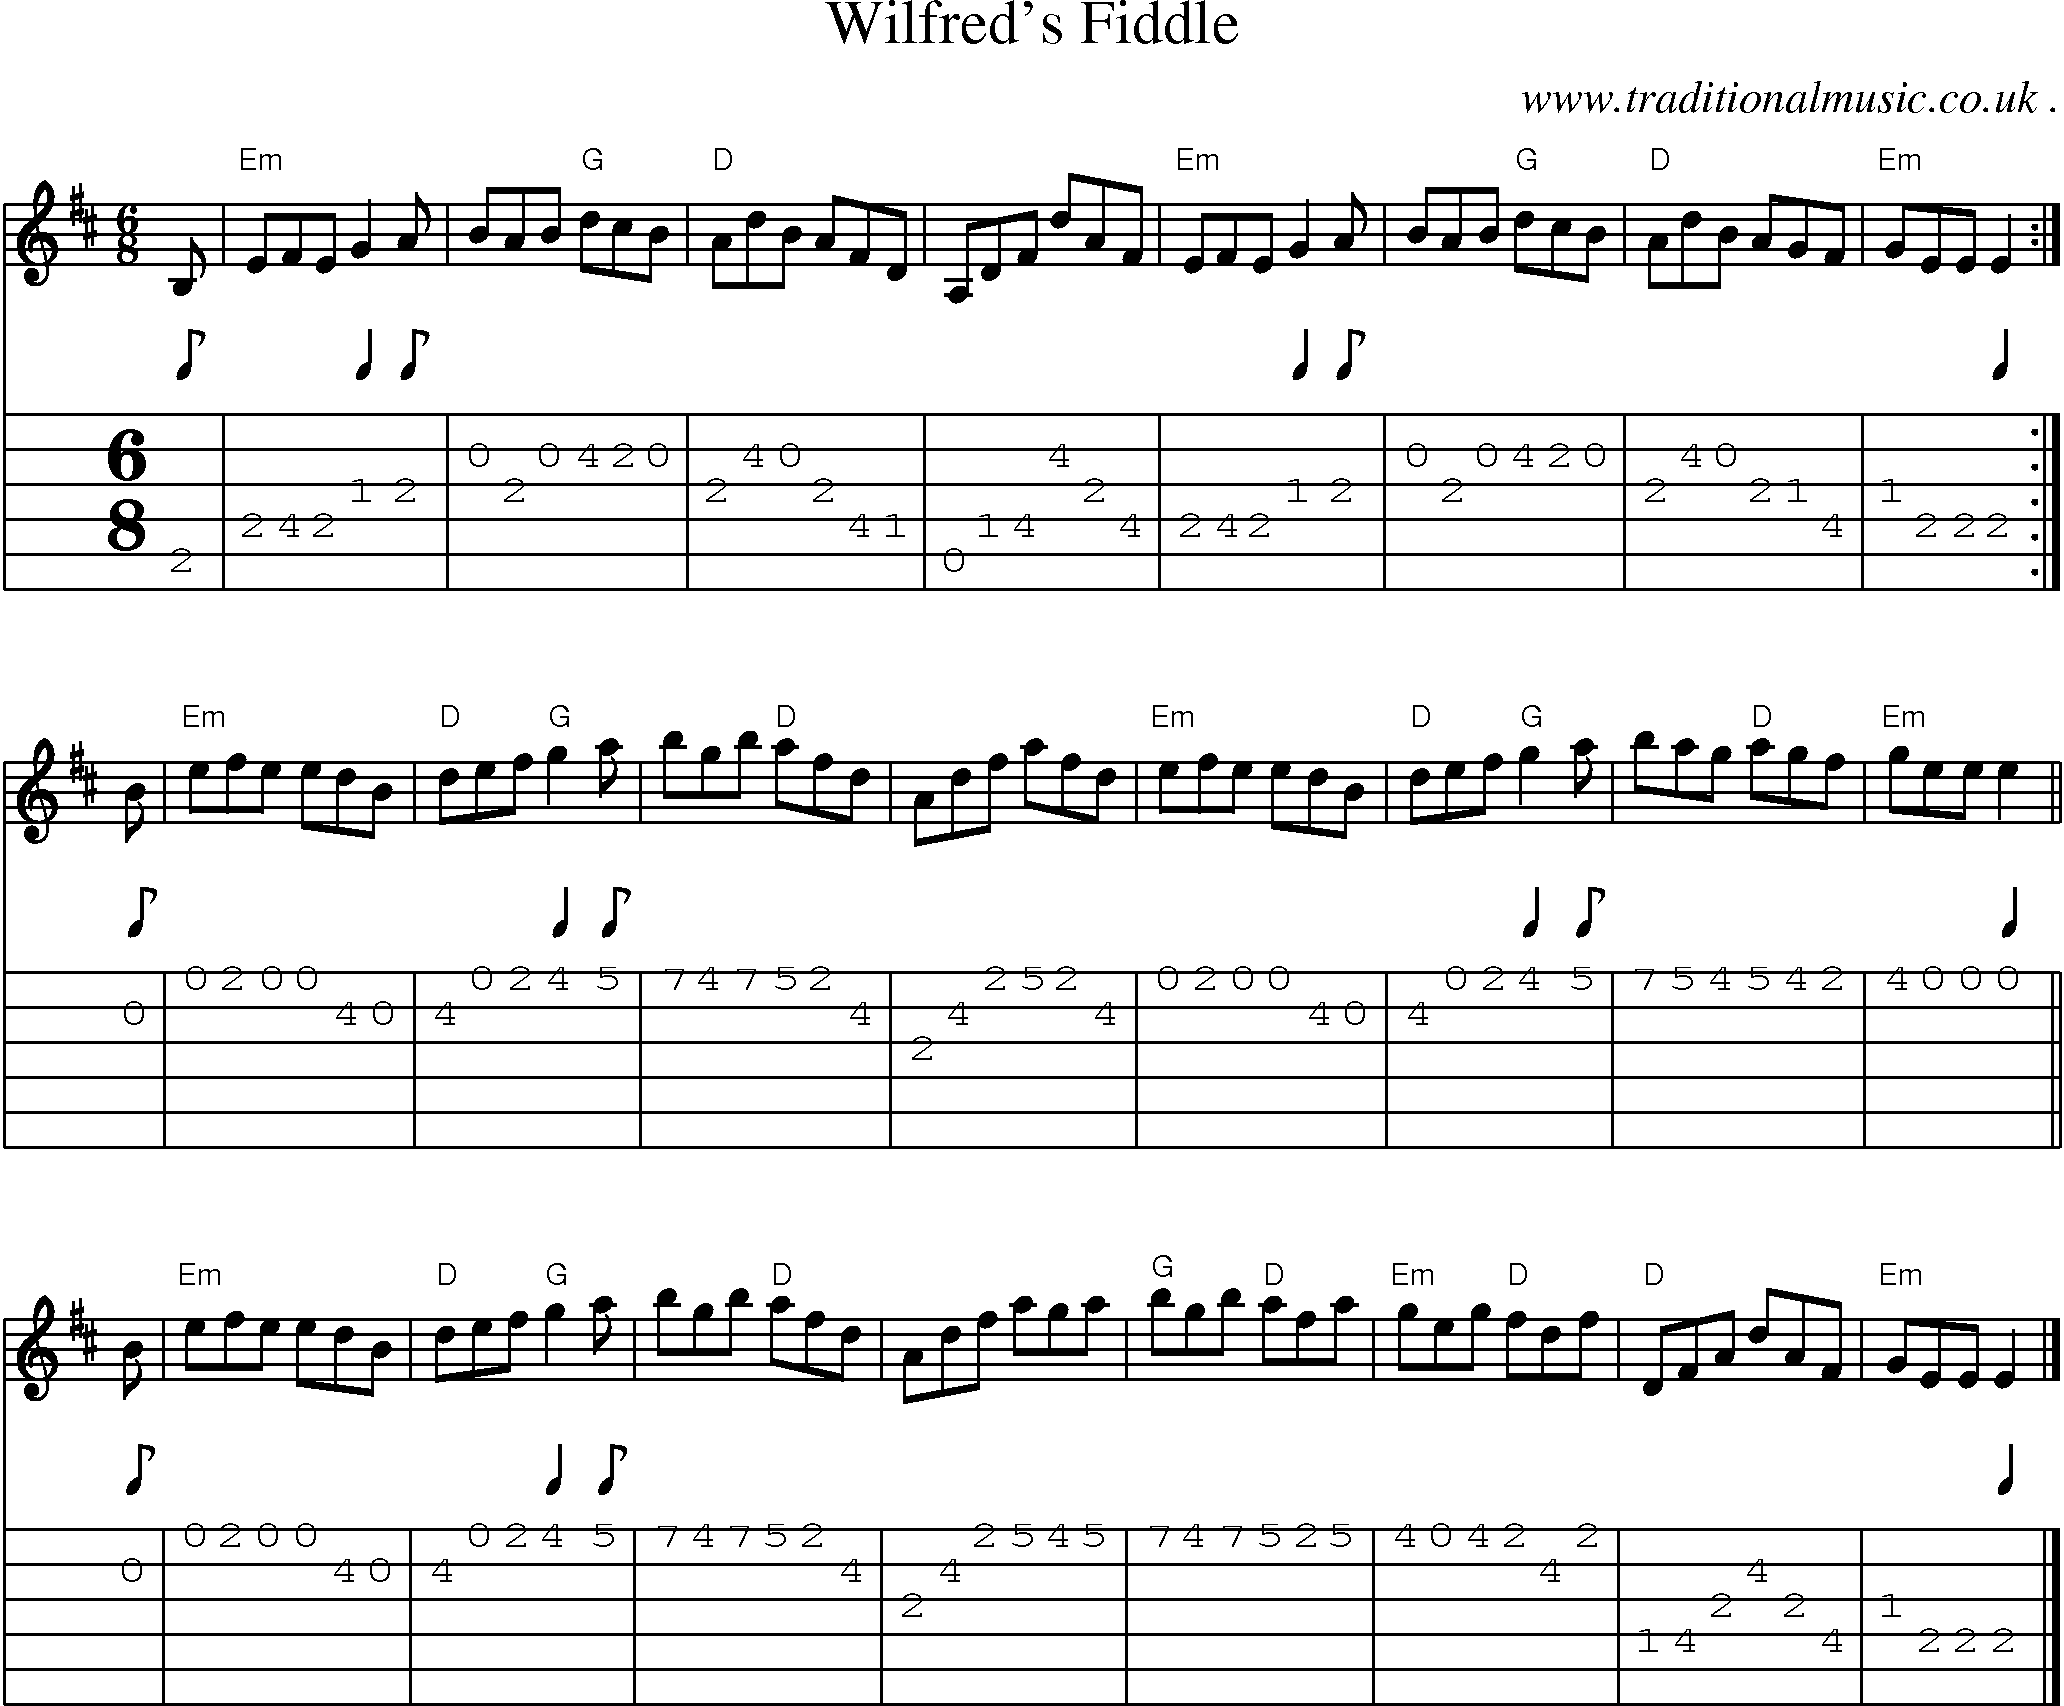 Sheet-music  score, Chords and Guitar Tabs for Wilfreds Fiddle